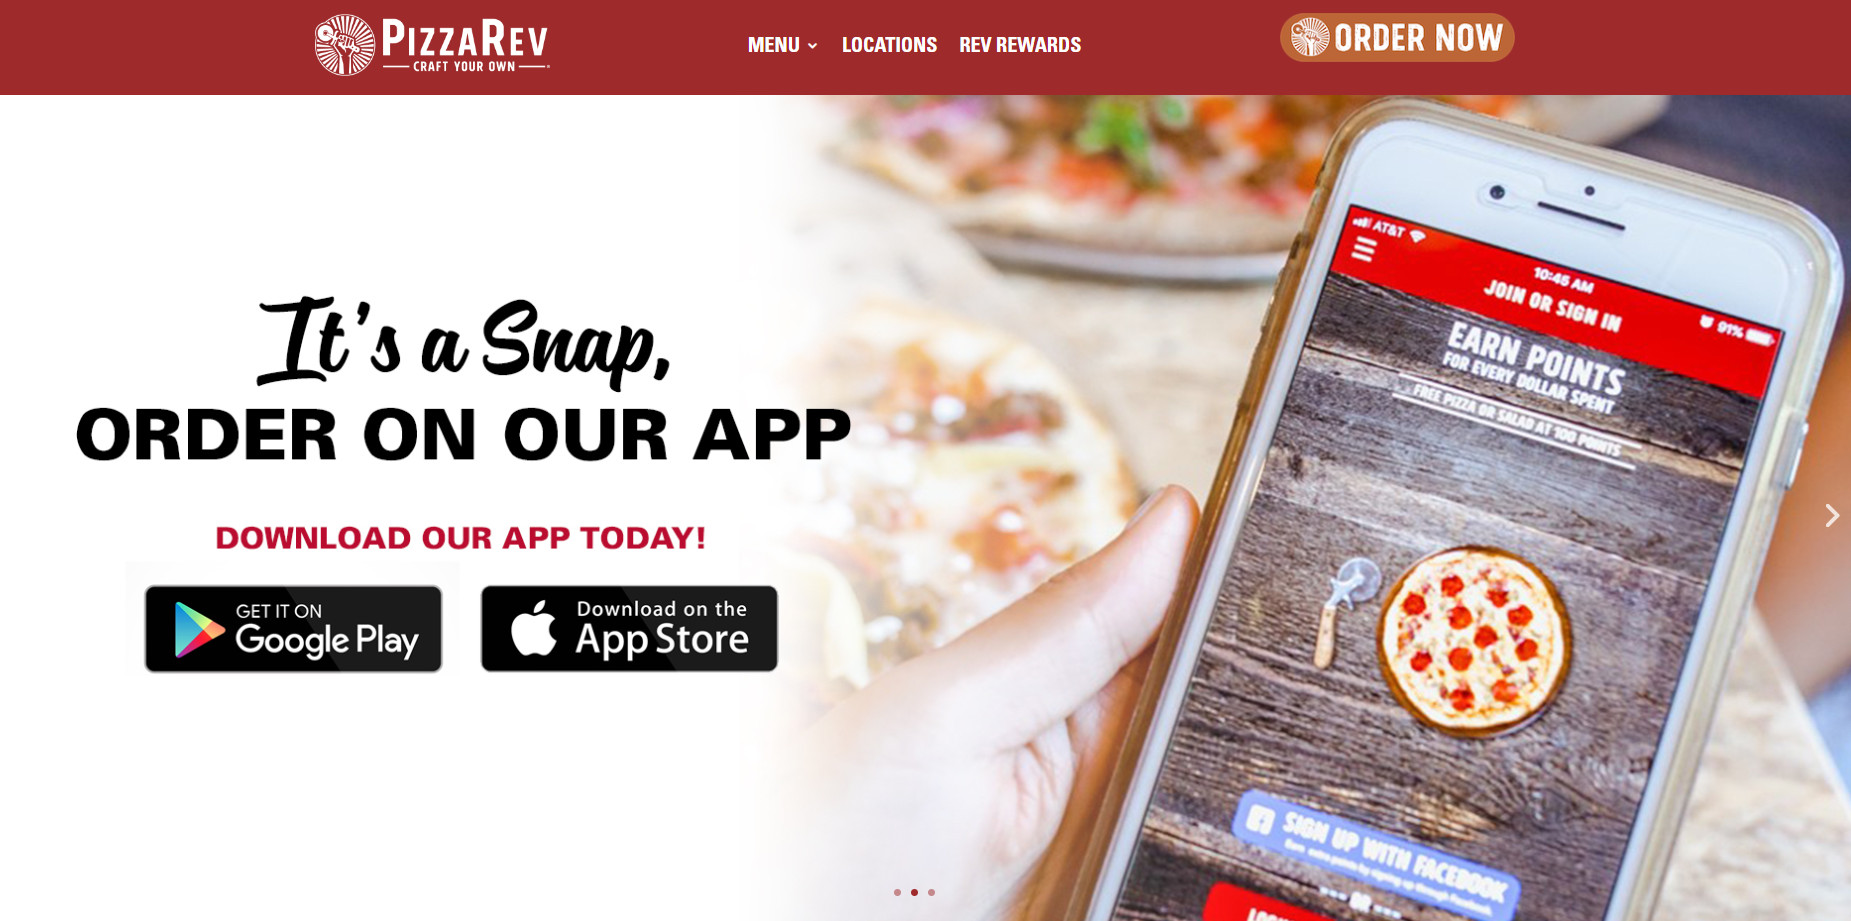  pizza website template example Pizza Rev